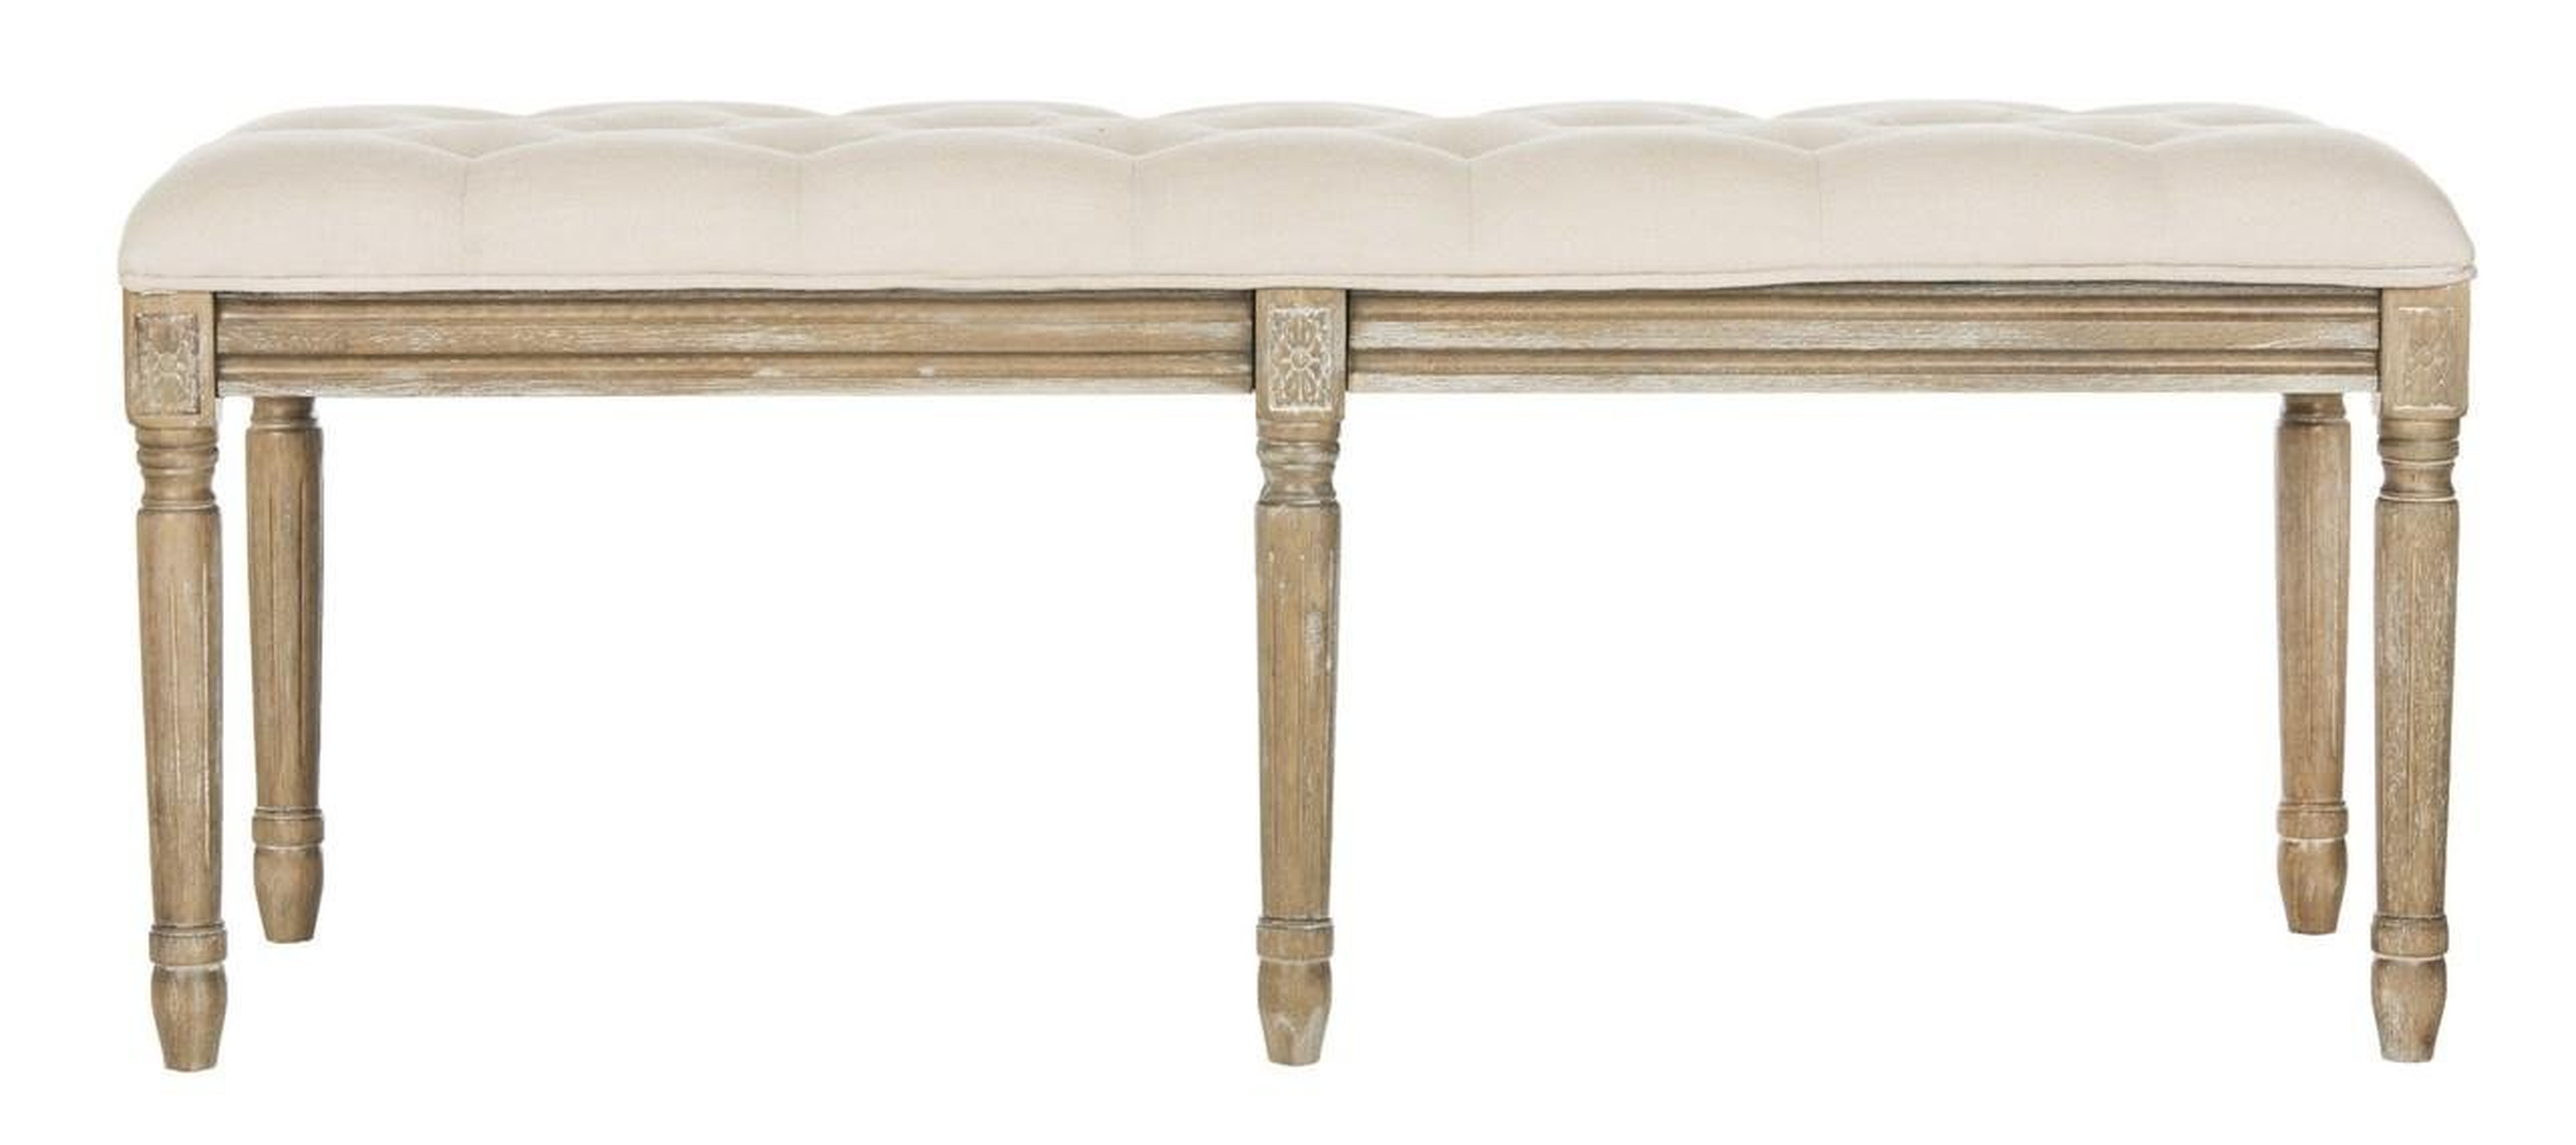 ROCHA 19''H FRENCH BRASSERIE TUFTED TRADITIONAL RUSTIC WOOD BENCH - Arlo Home